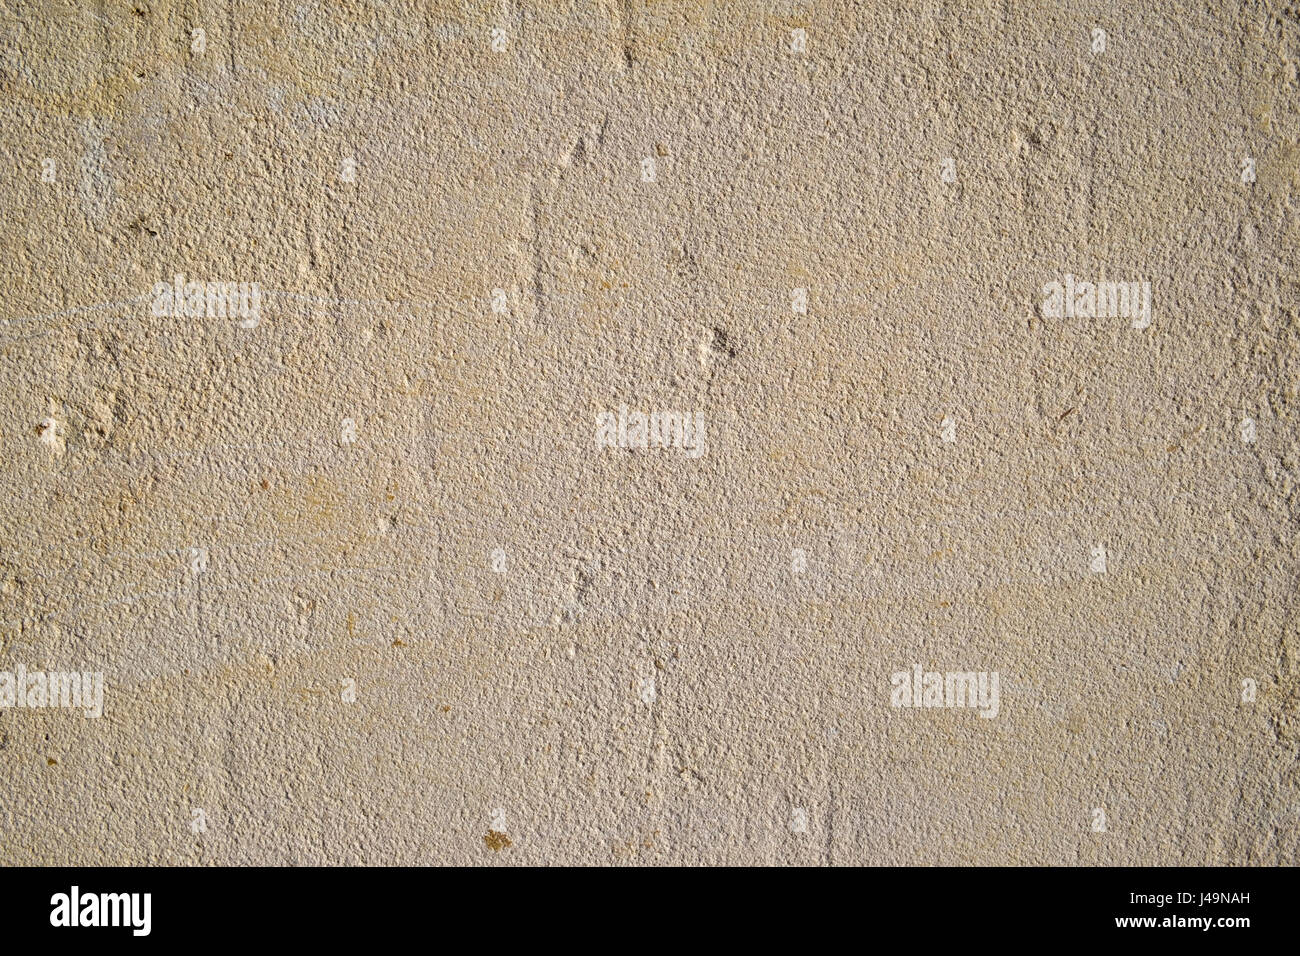 Rough rendered exterior wall full frame background texture Stock Photo